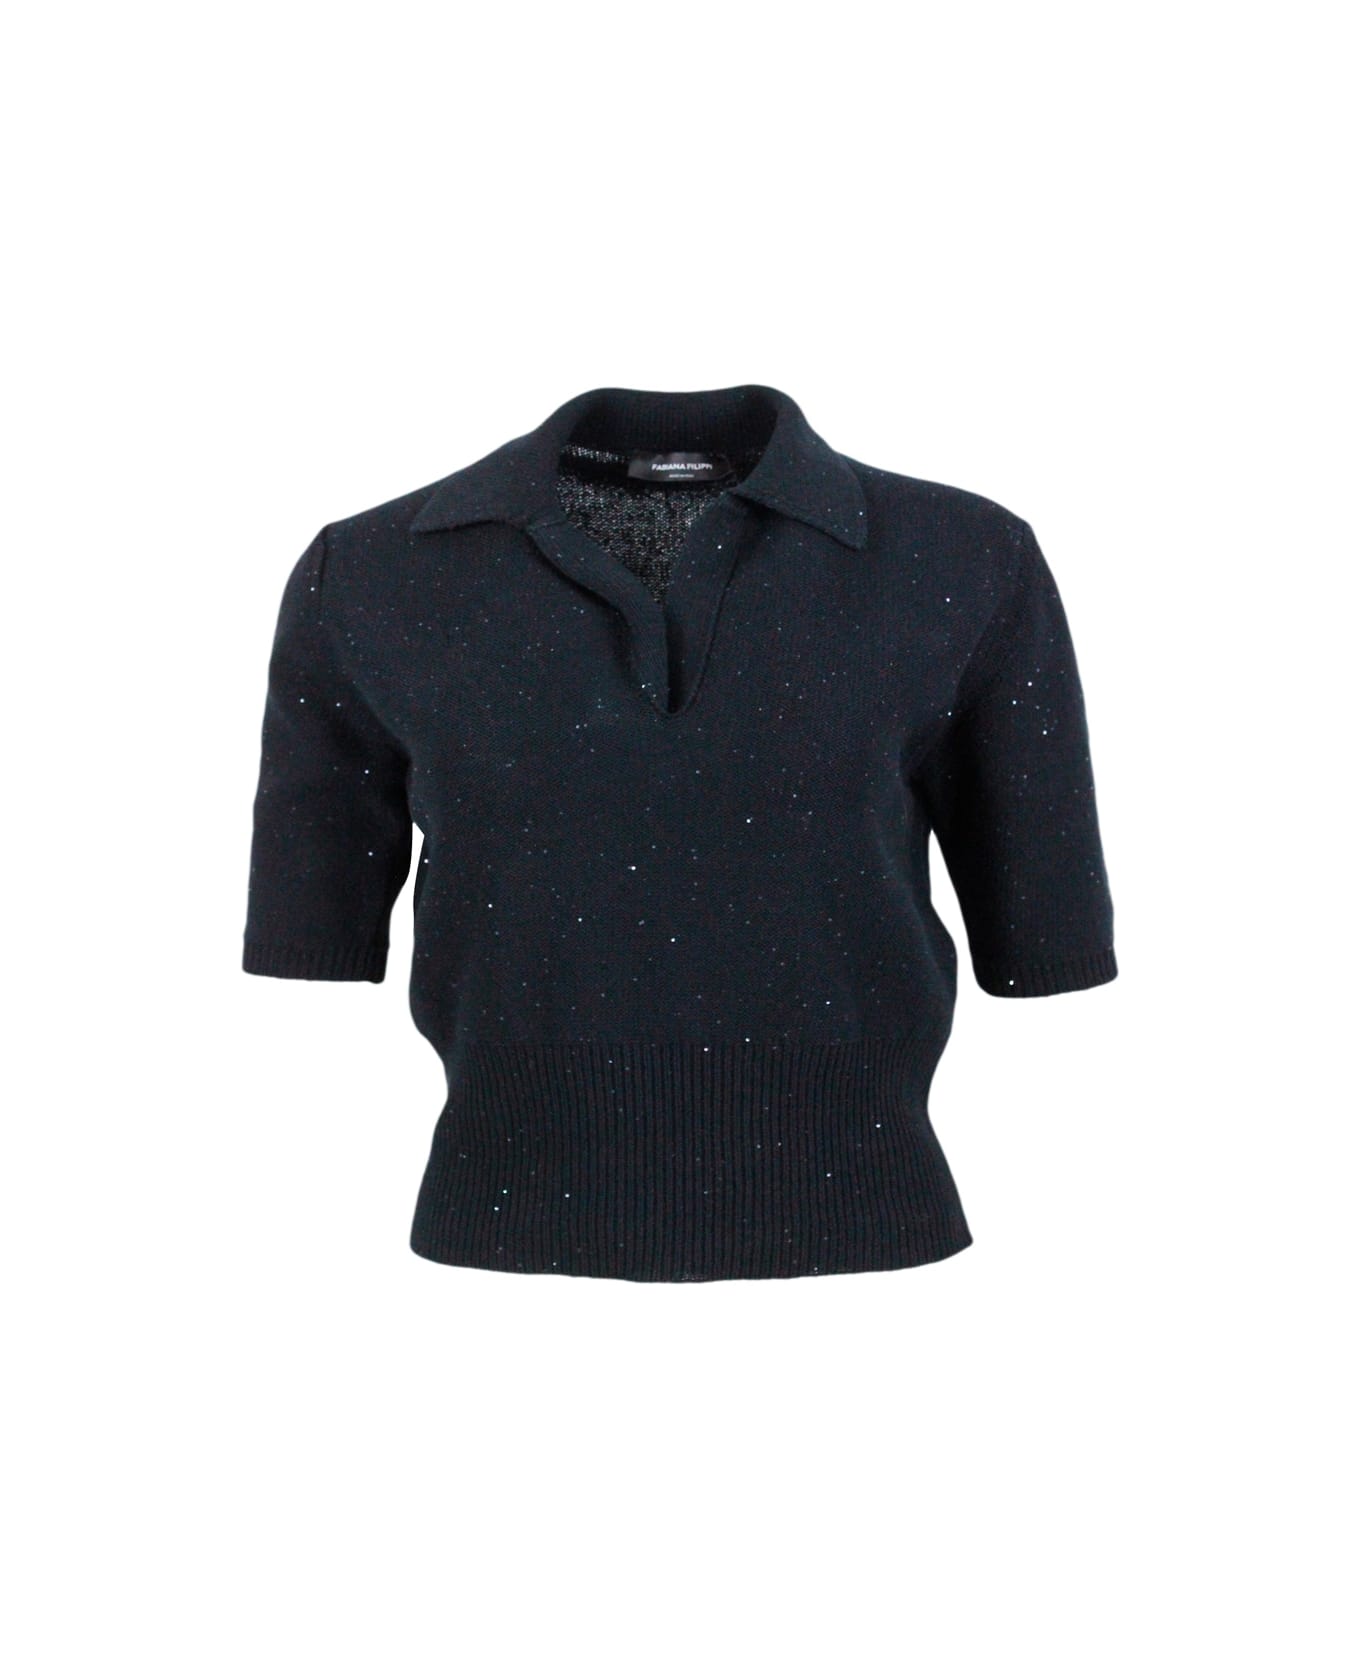 Fabiana Filippi Short-sleeved Polo Shirt In Cotton And Linen, Embellished With Brilliant Applied Micro-sequins - Black ニットウェア